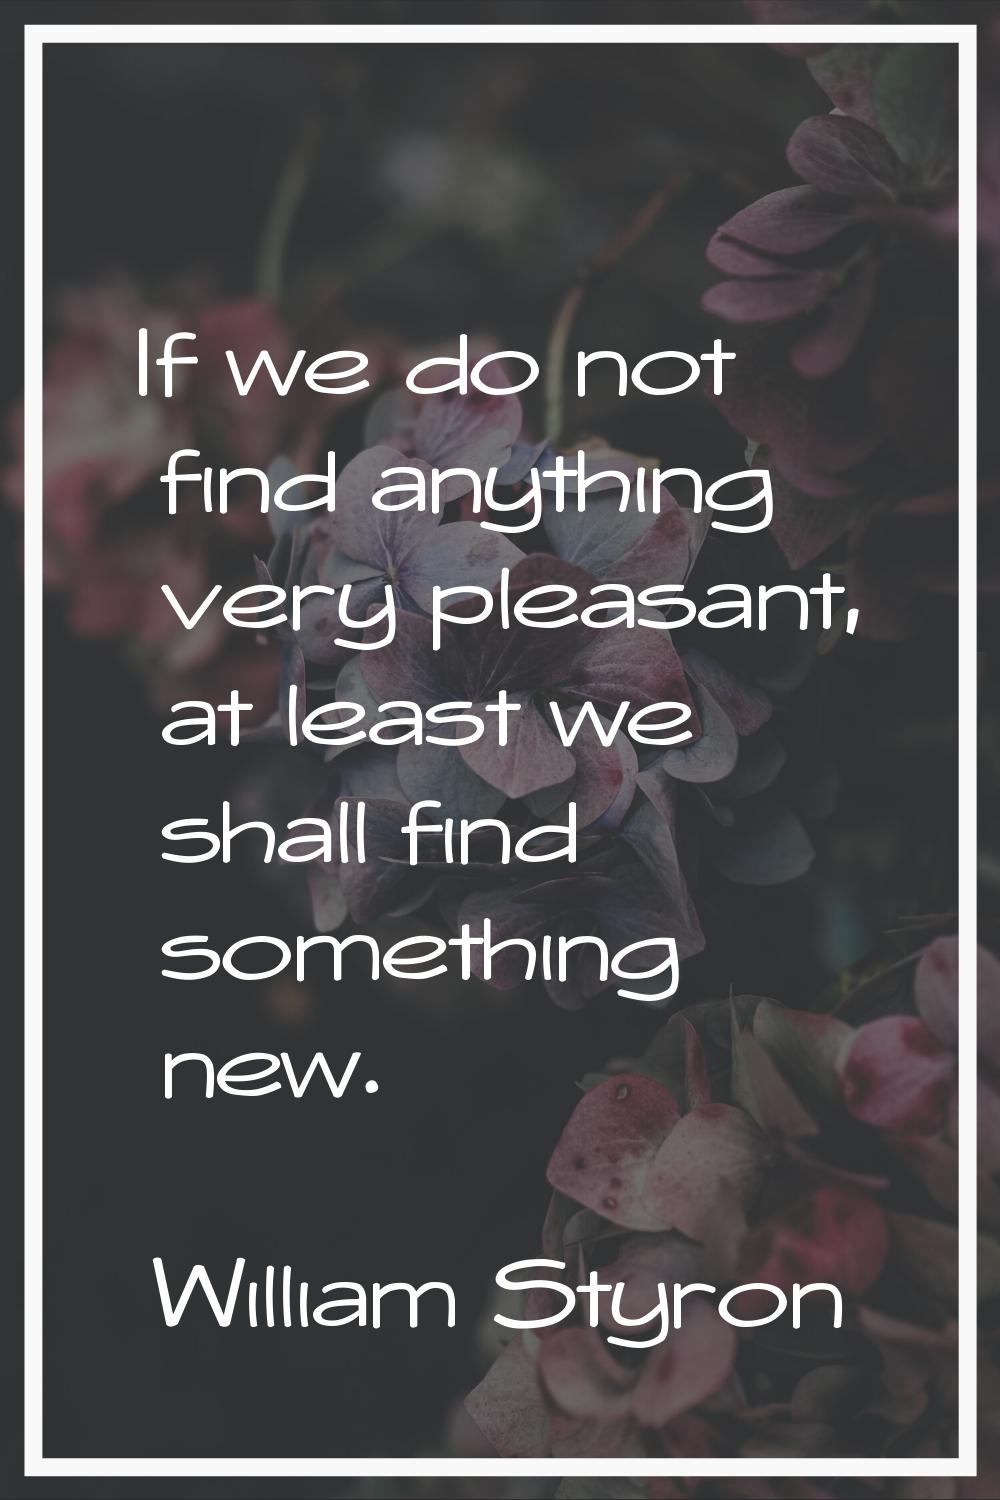 If we do not find anything very pleasant, at least we shall find something new.